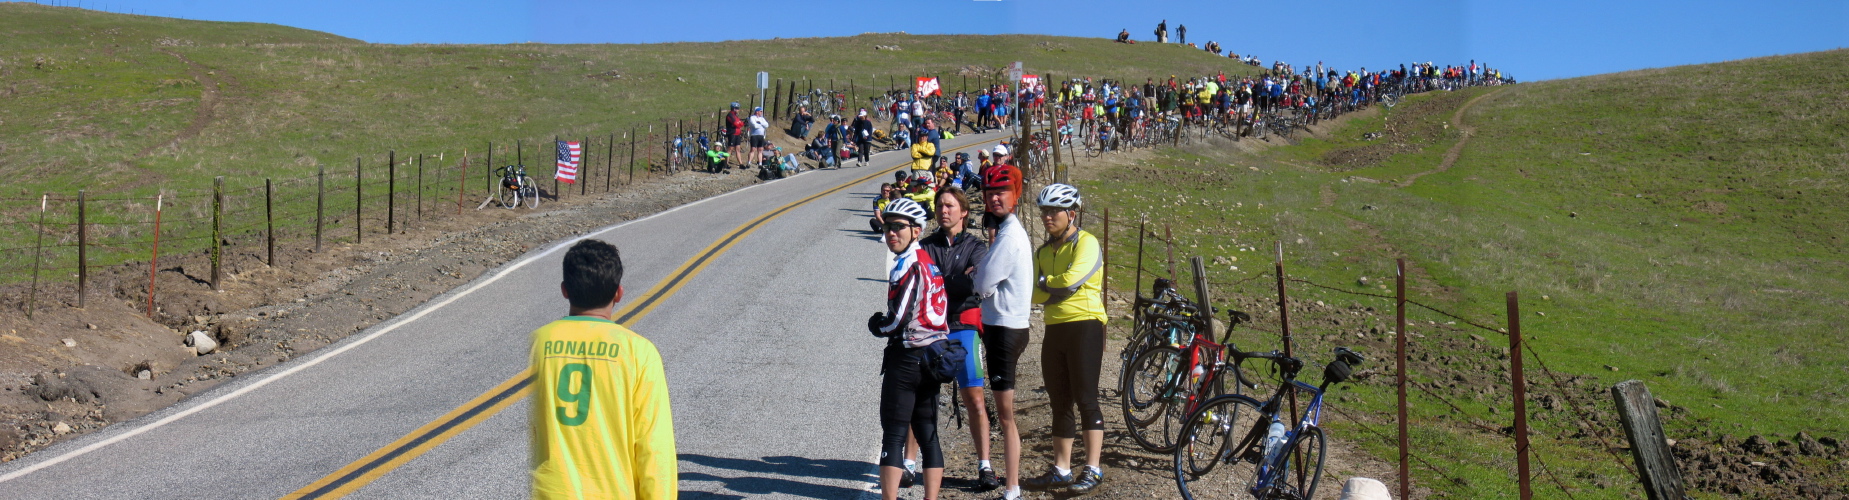 The crowd by the road below the false summit on Sierra Rd.